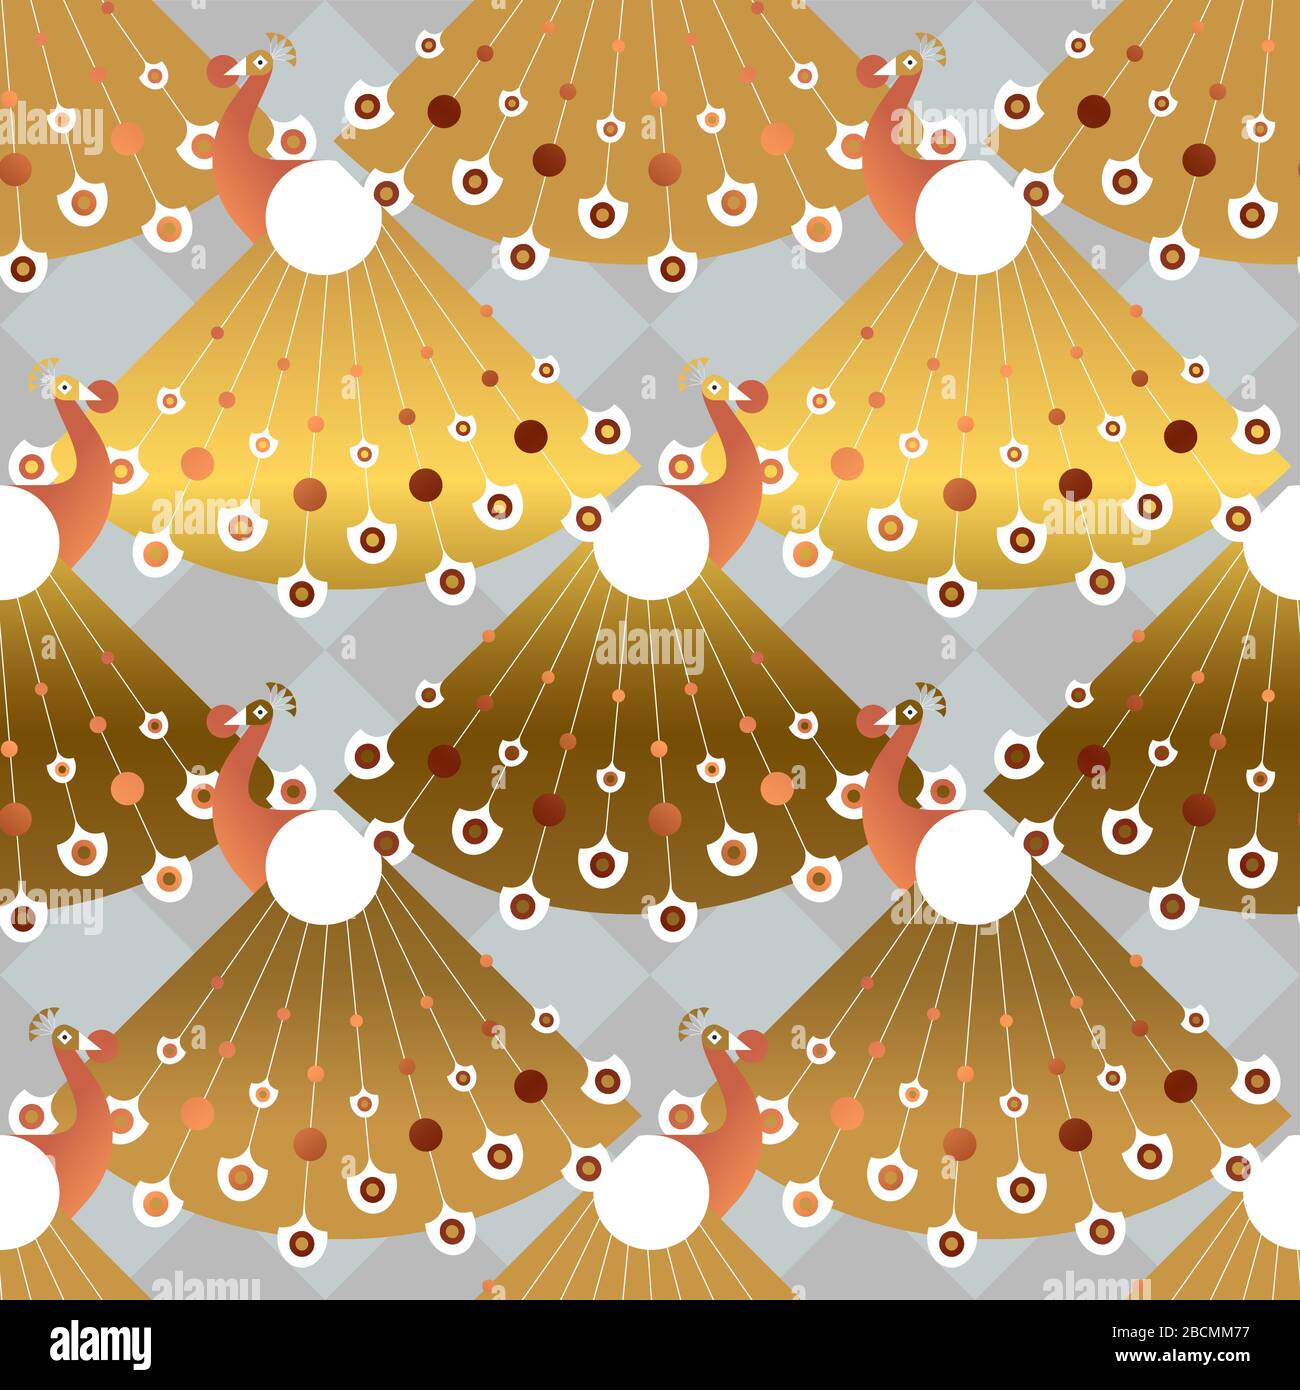 Abstract peacock bird seamless pattern in vintage art deco style. Luxury gold and bronze geometric animal background for elegant retro design or fancy Stock Vector